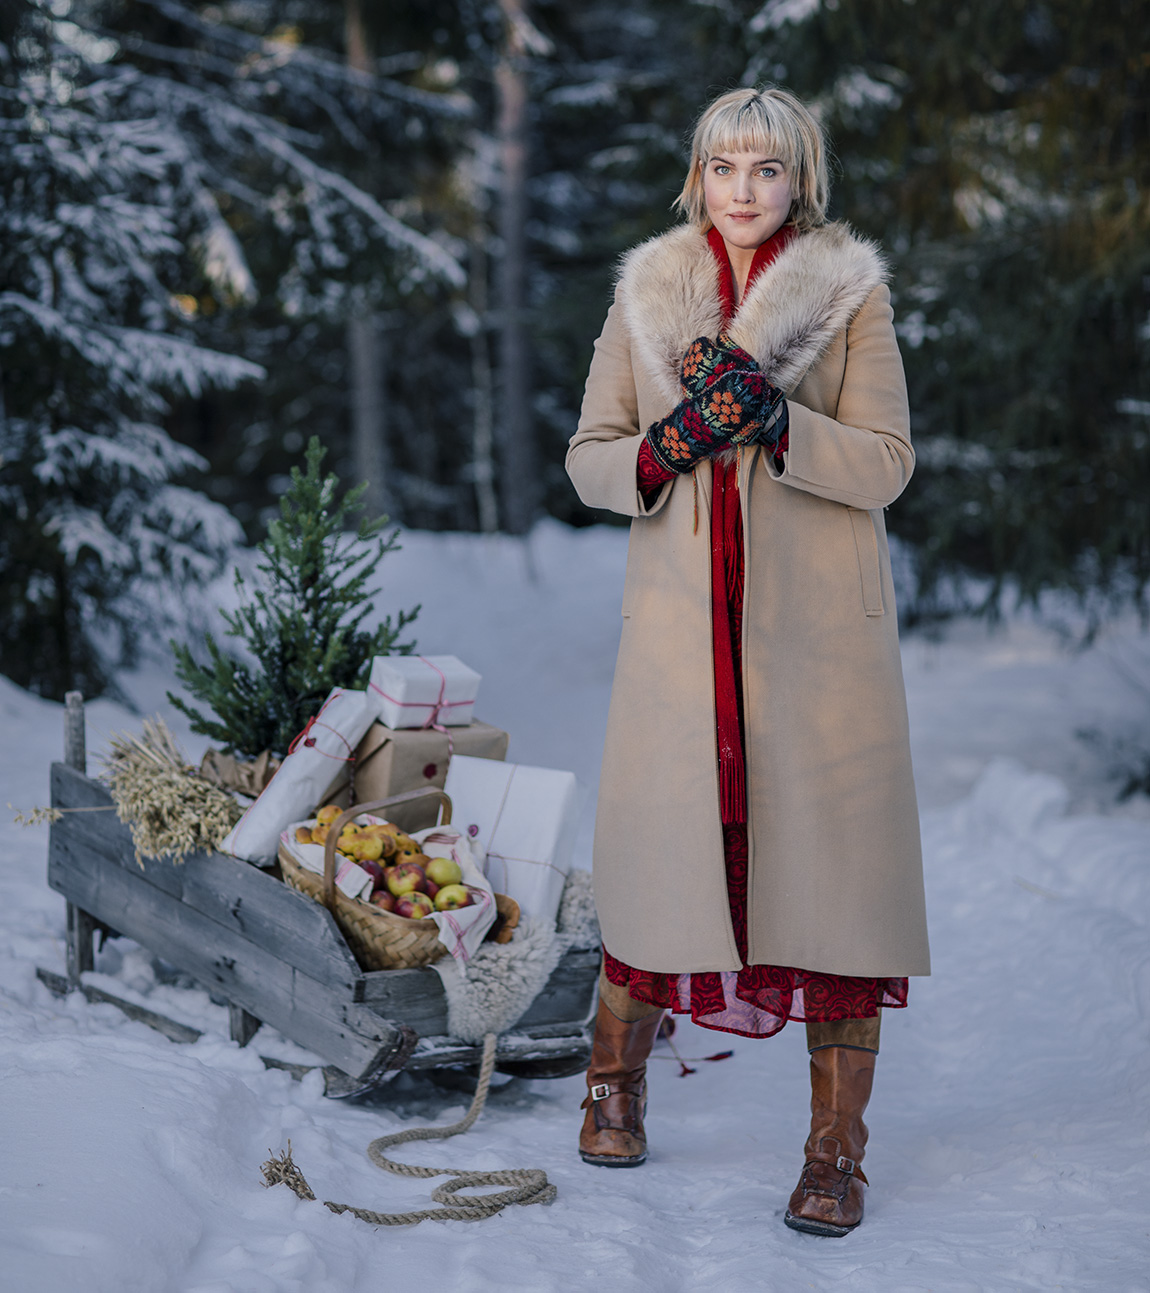 CLARA LIDSTRÖM, SWEDEN’S MOST POPULAR LIFESTYLE BLOGGER ON HOW TO EMBRACE THE SEASONS